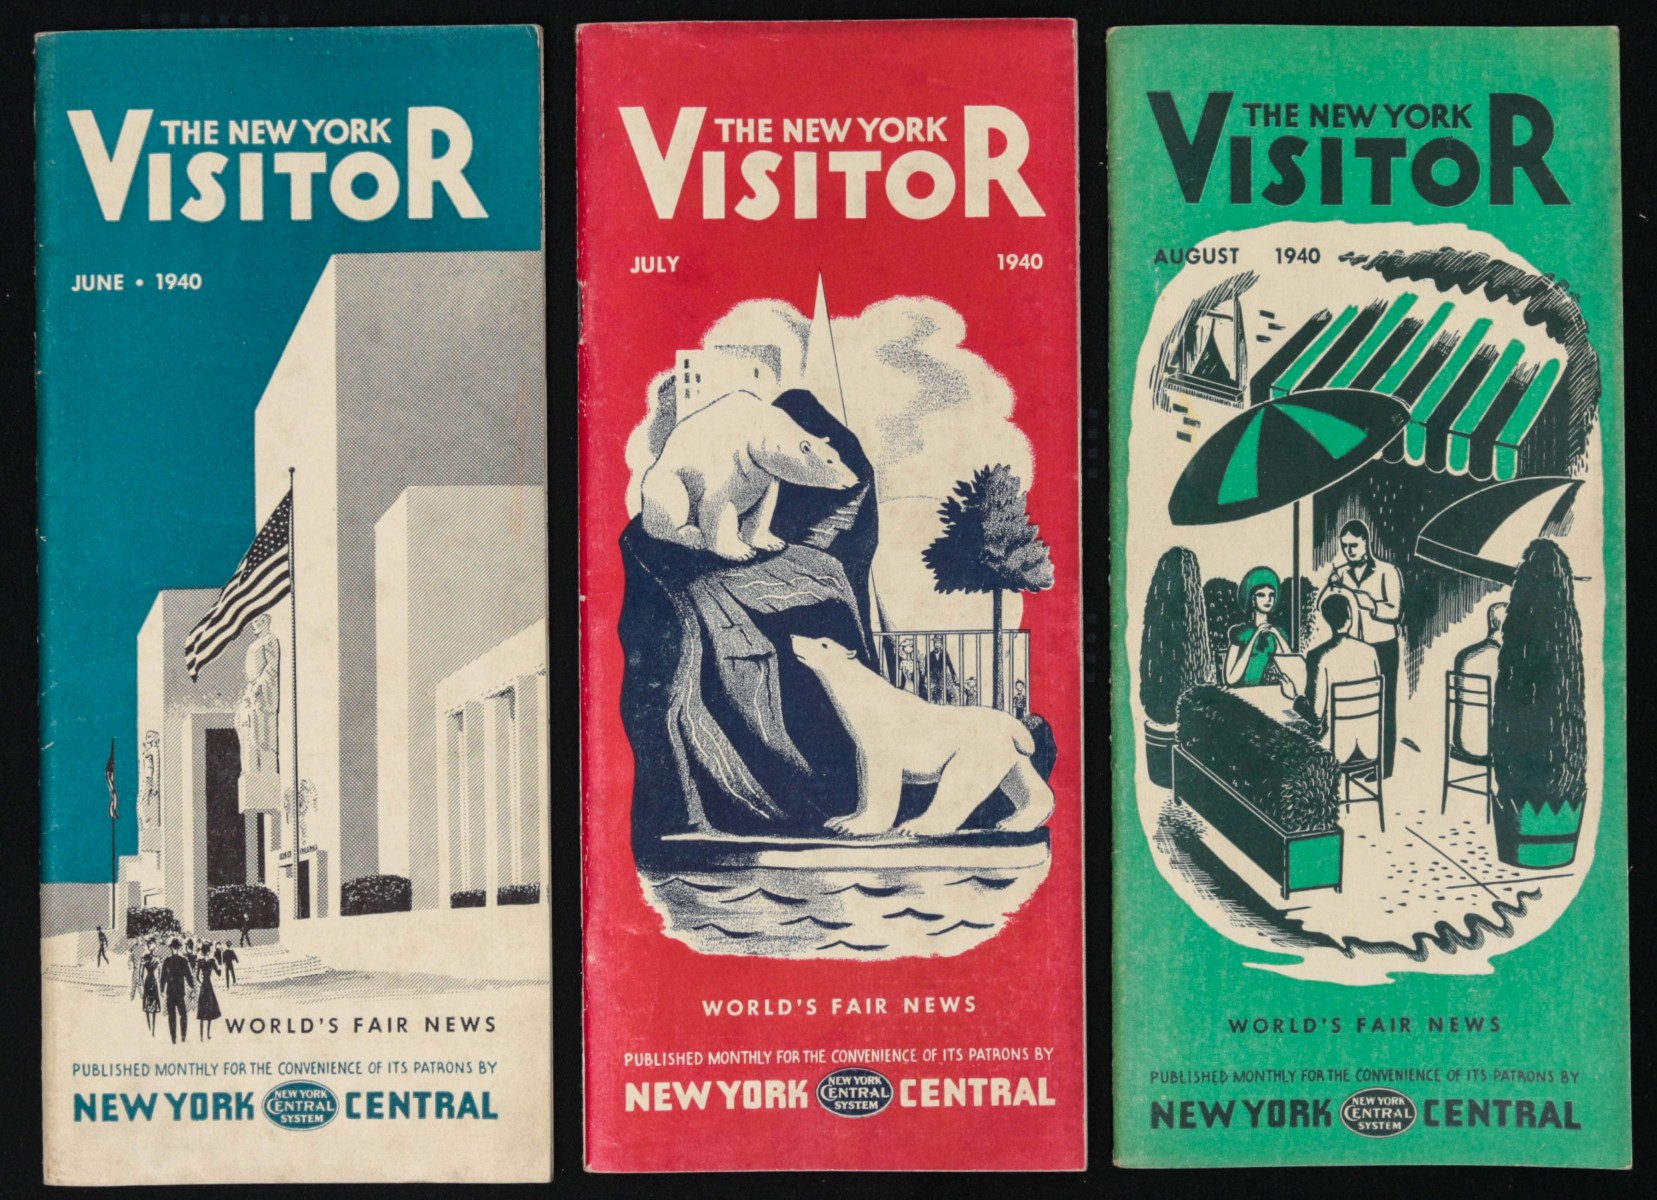 A COLLECTION OF VINTAGE N.Y.C.R.R. TIME TABLES